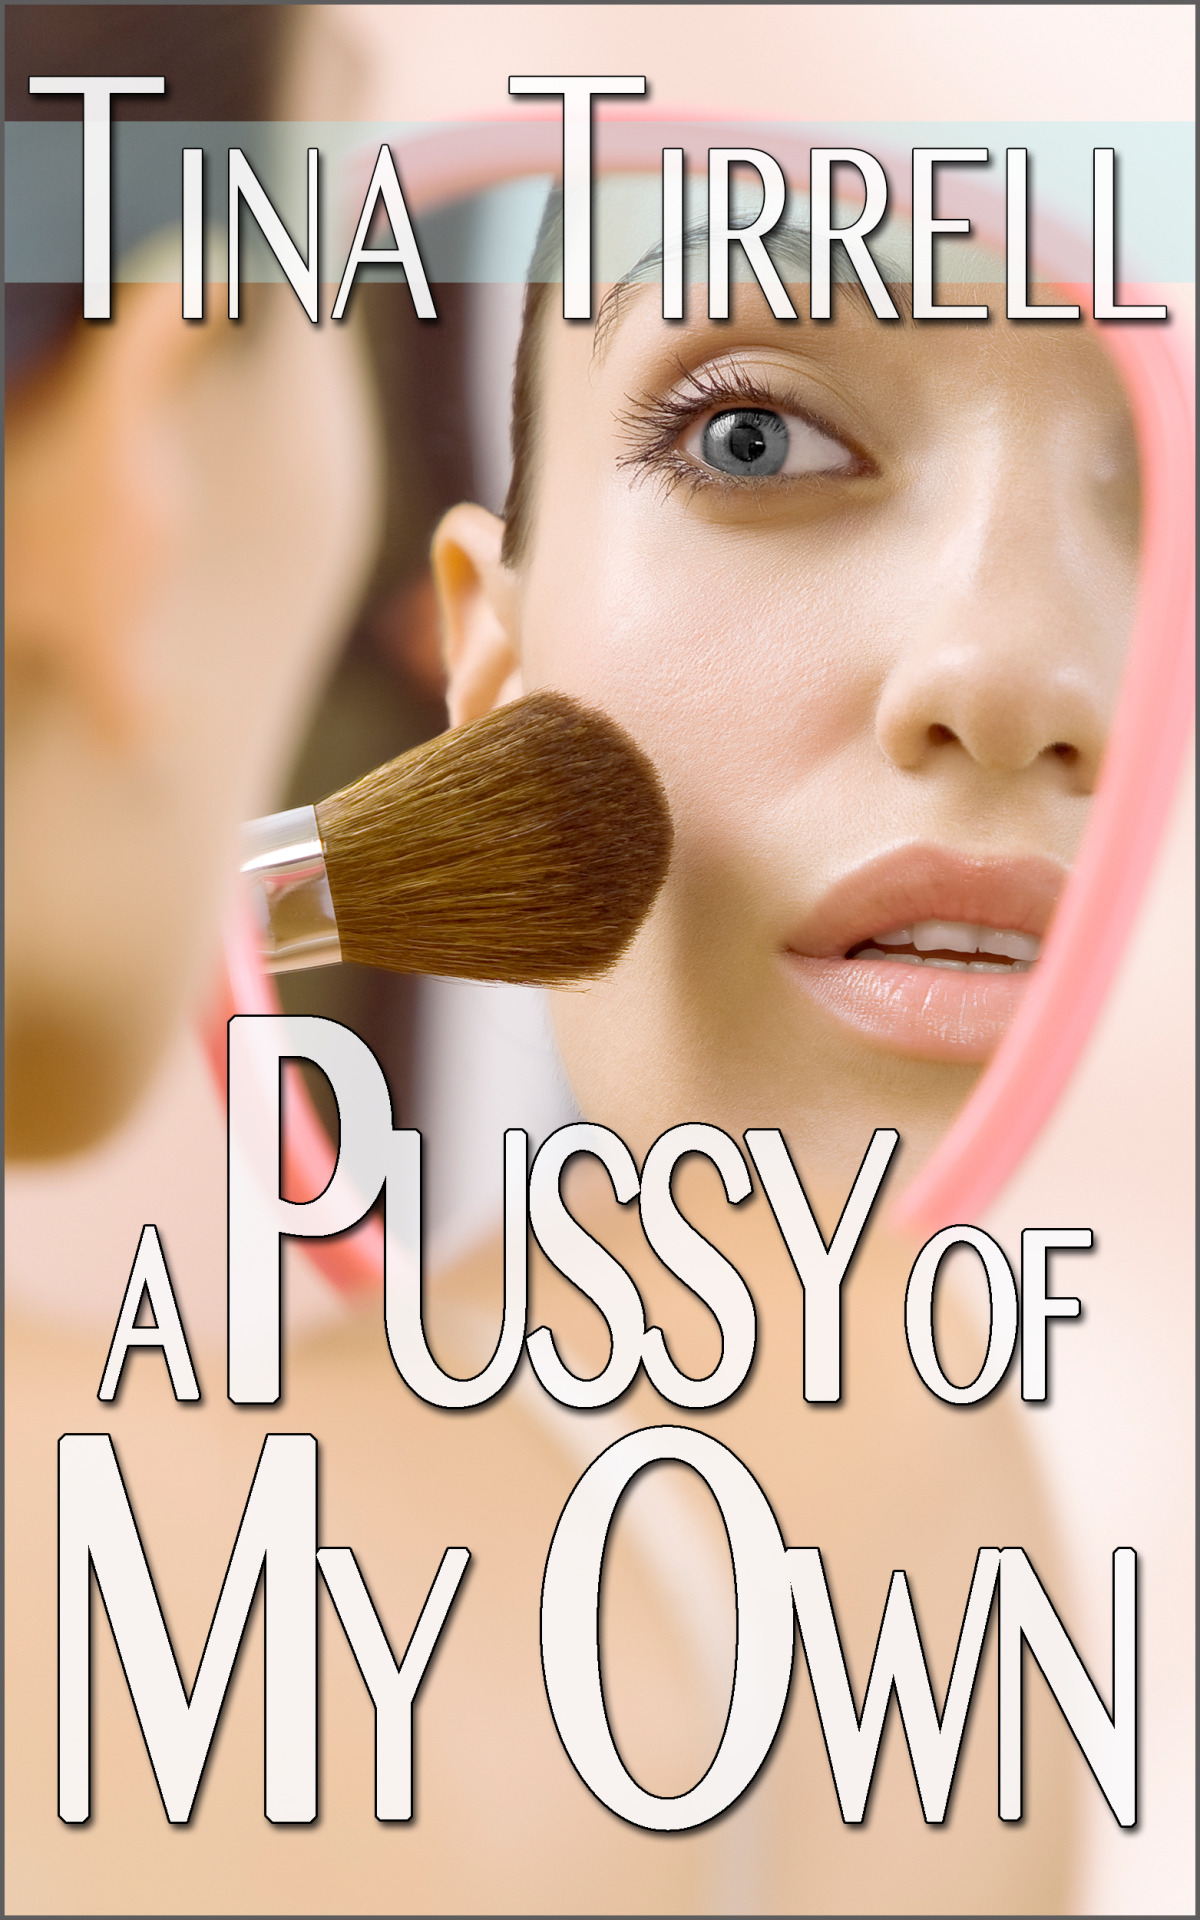 The hottest gender transformation erotica you will ever read.  Live out your fantasy